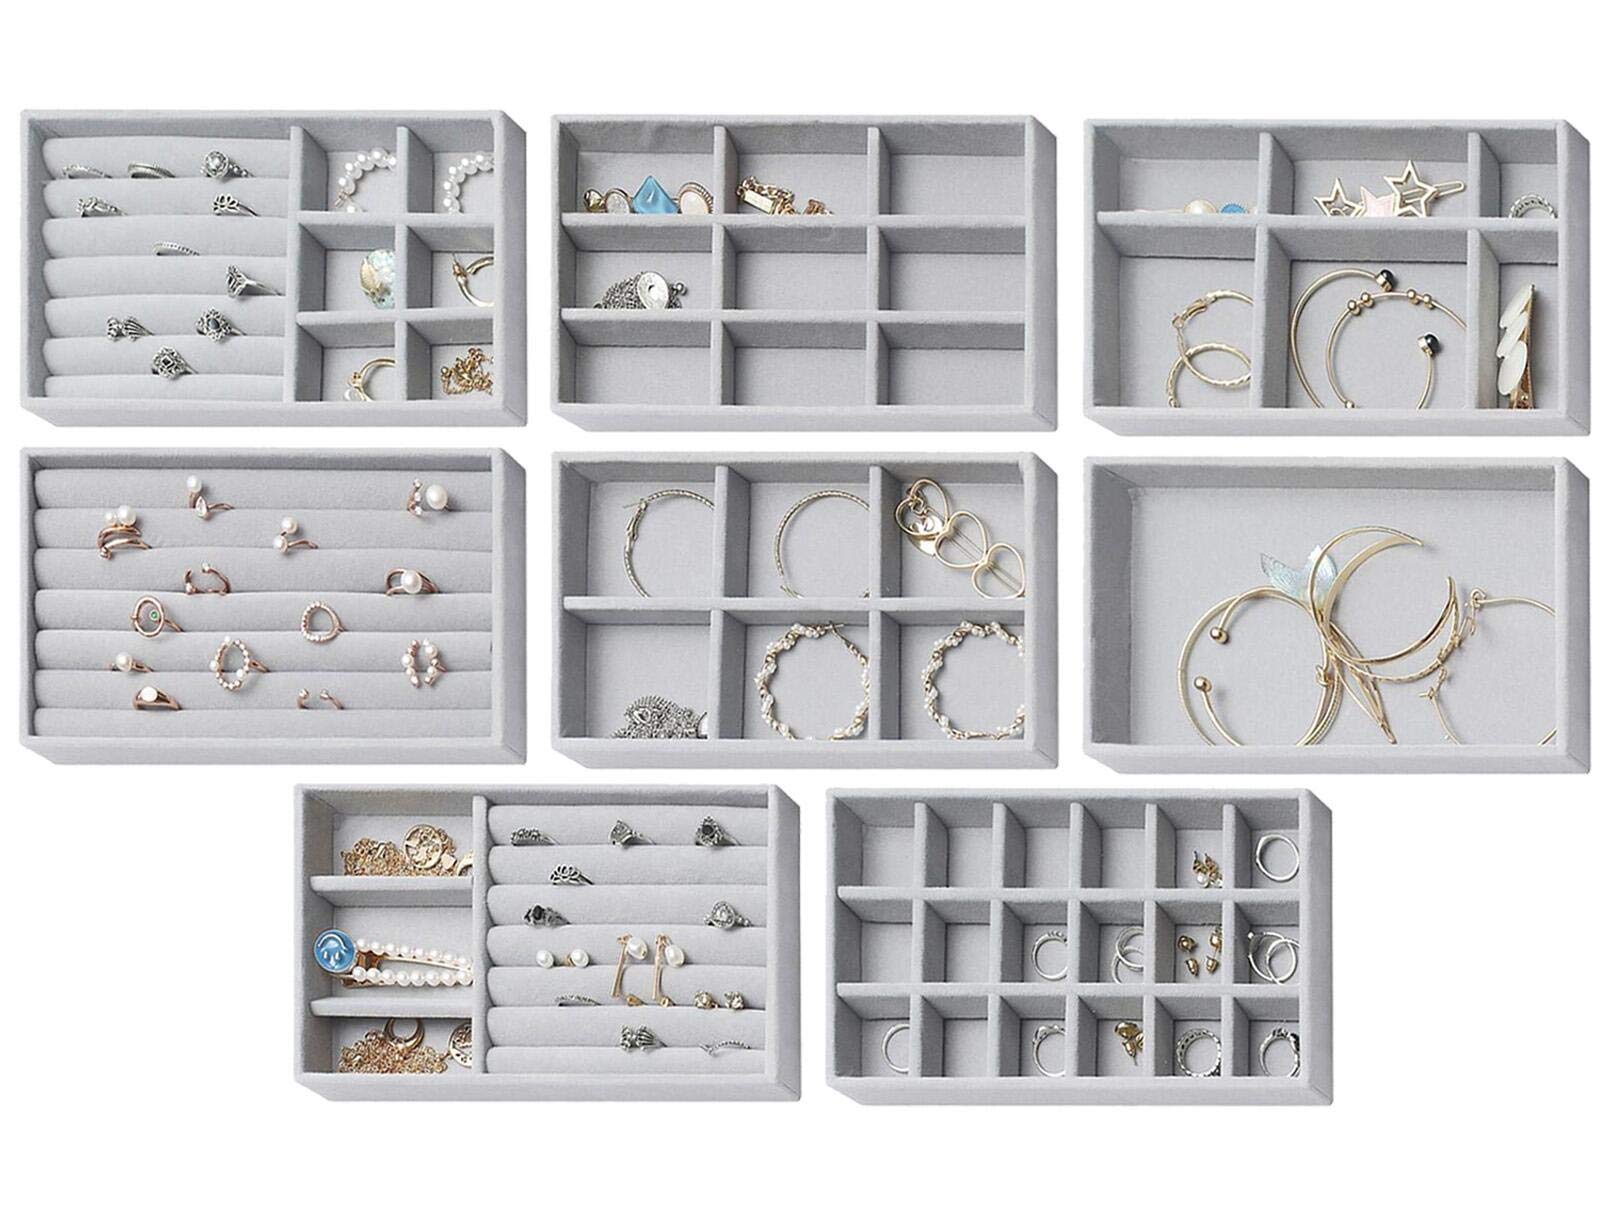 Nwvuop 8 Pack Jewelry Tray Organizer Set Stackable Jewelry Organizer for Bracelet Necklace Earring Ring Jewelry Display Tray for Drawer Grey